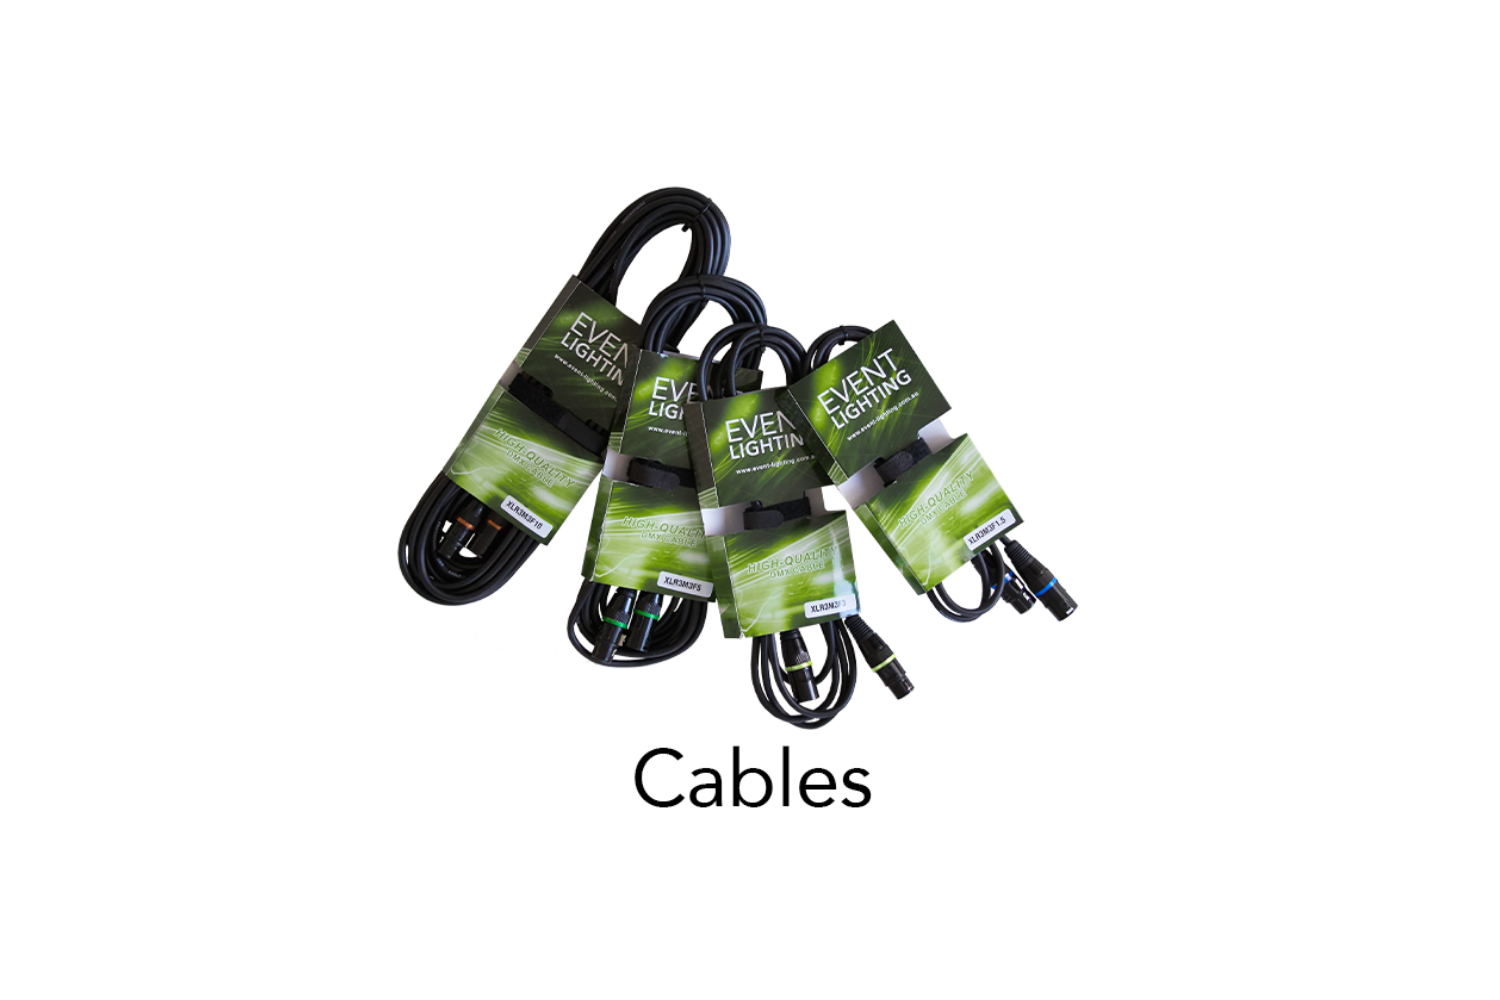 Event Lighting Cables Now In Stock!